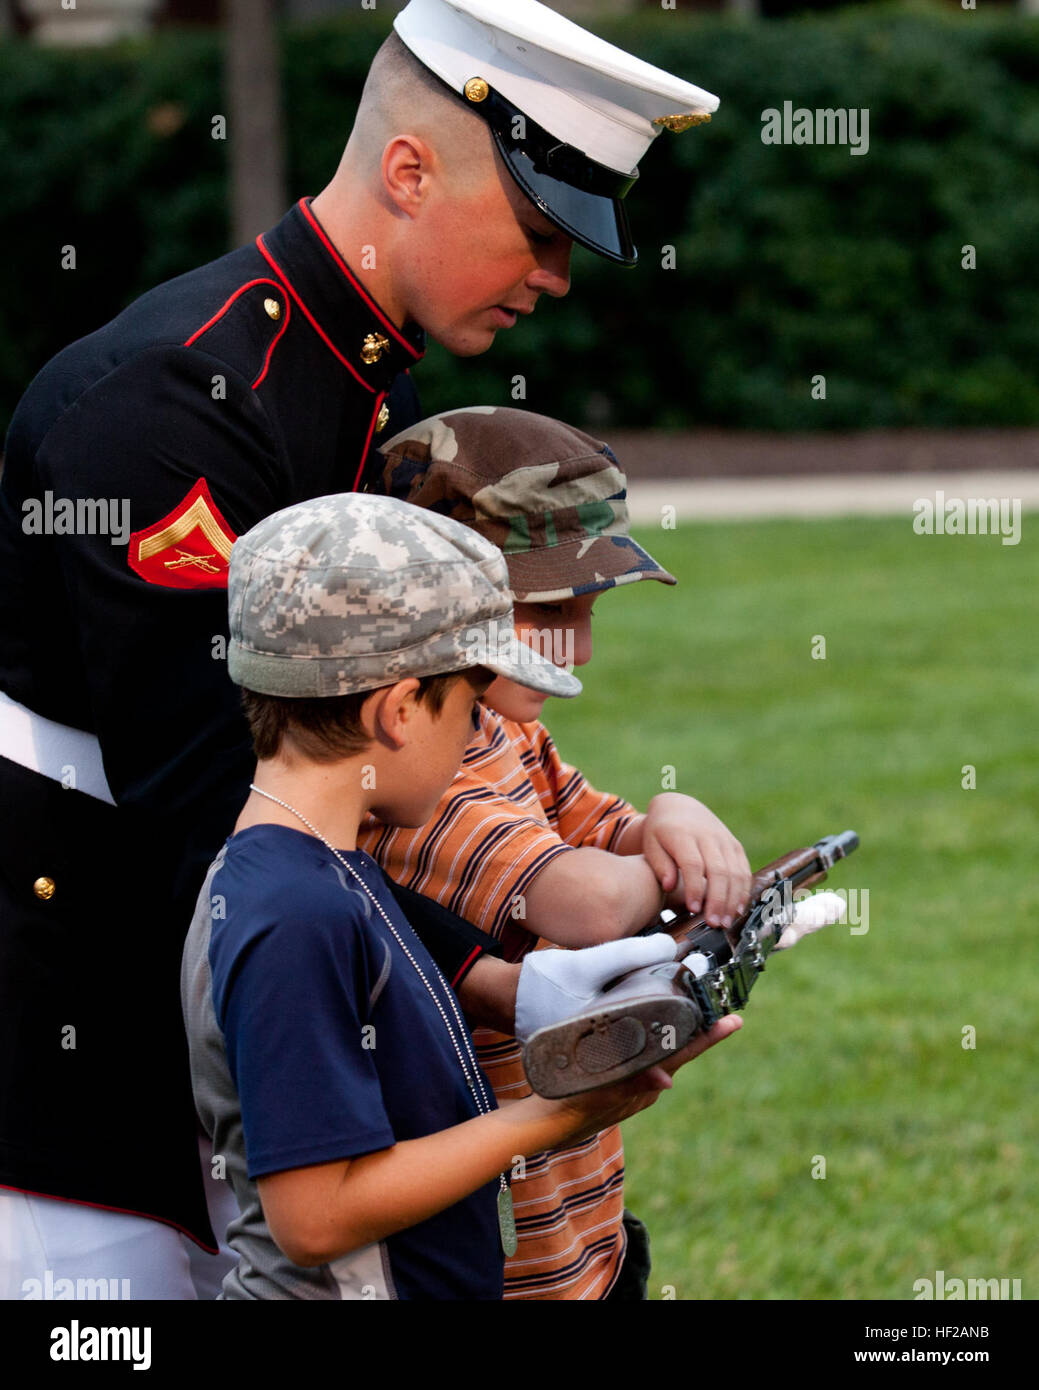 A U.S. Marine lance corporal shows his ceremonial M1 Garand rifle to young children during an Evening Parade reception at Marine Barracks Washington in Washington, D.C., July 18, 2014. Evening Parades are held every Friday during the summer months. (U.S. Marine Corps photo by Lance Cpl. Jacob Bozic/Released) Evening Parade 140718-M-GR671-063 Stock Photo